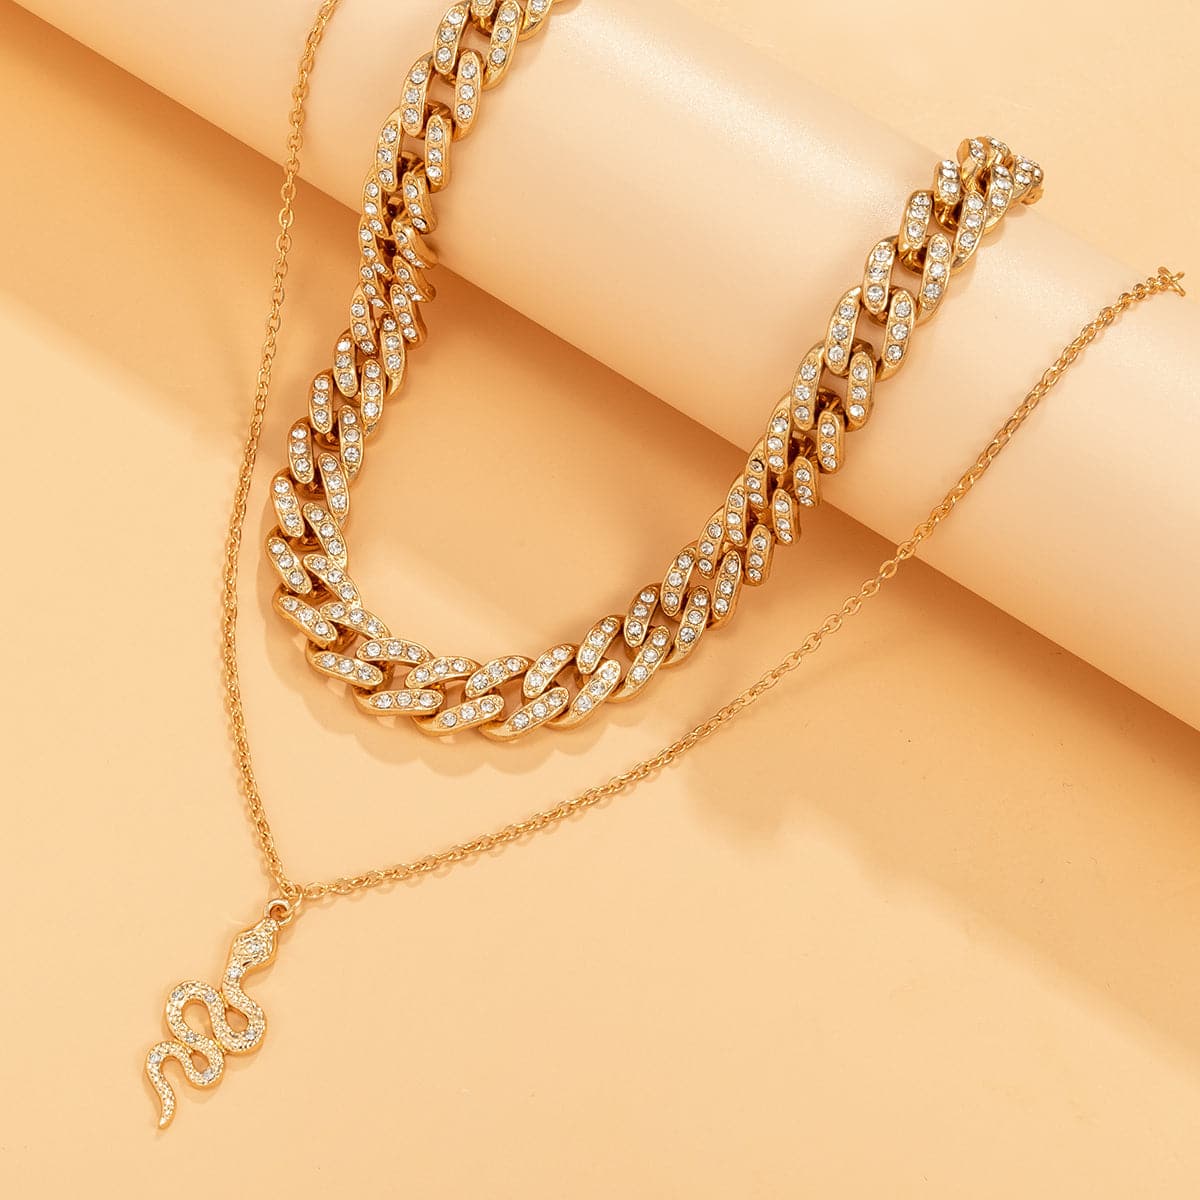 Cubic Zirconia & 18K Gold-Plated Curb Chain Snake Pendant Necklace Set